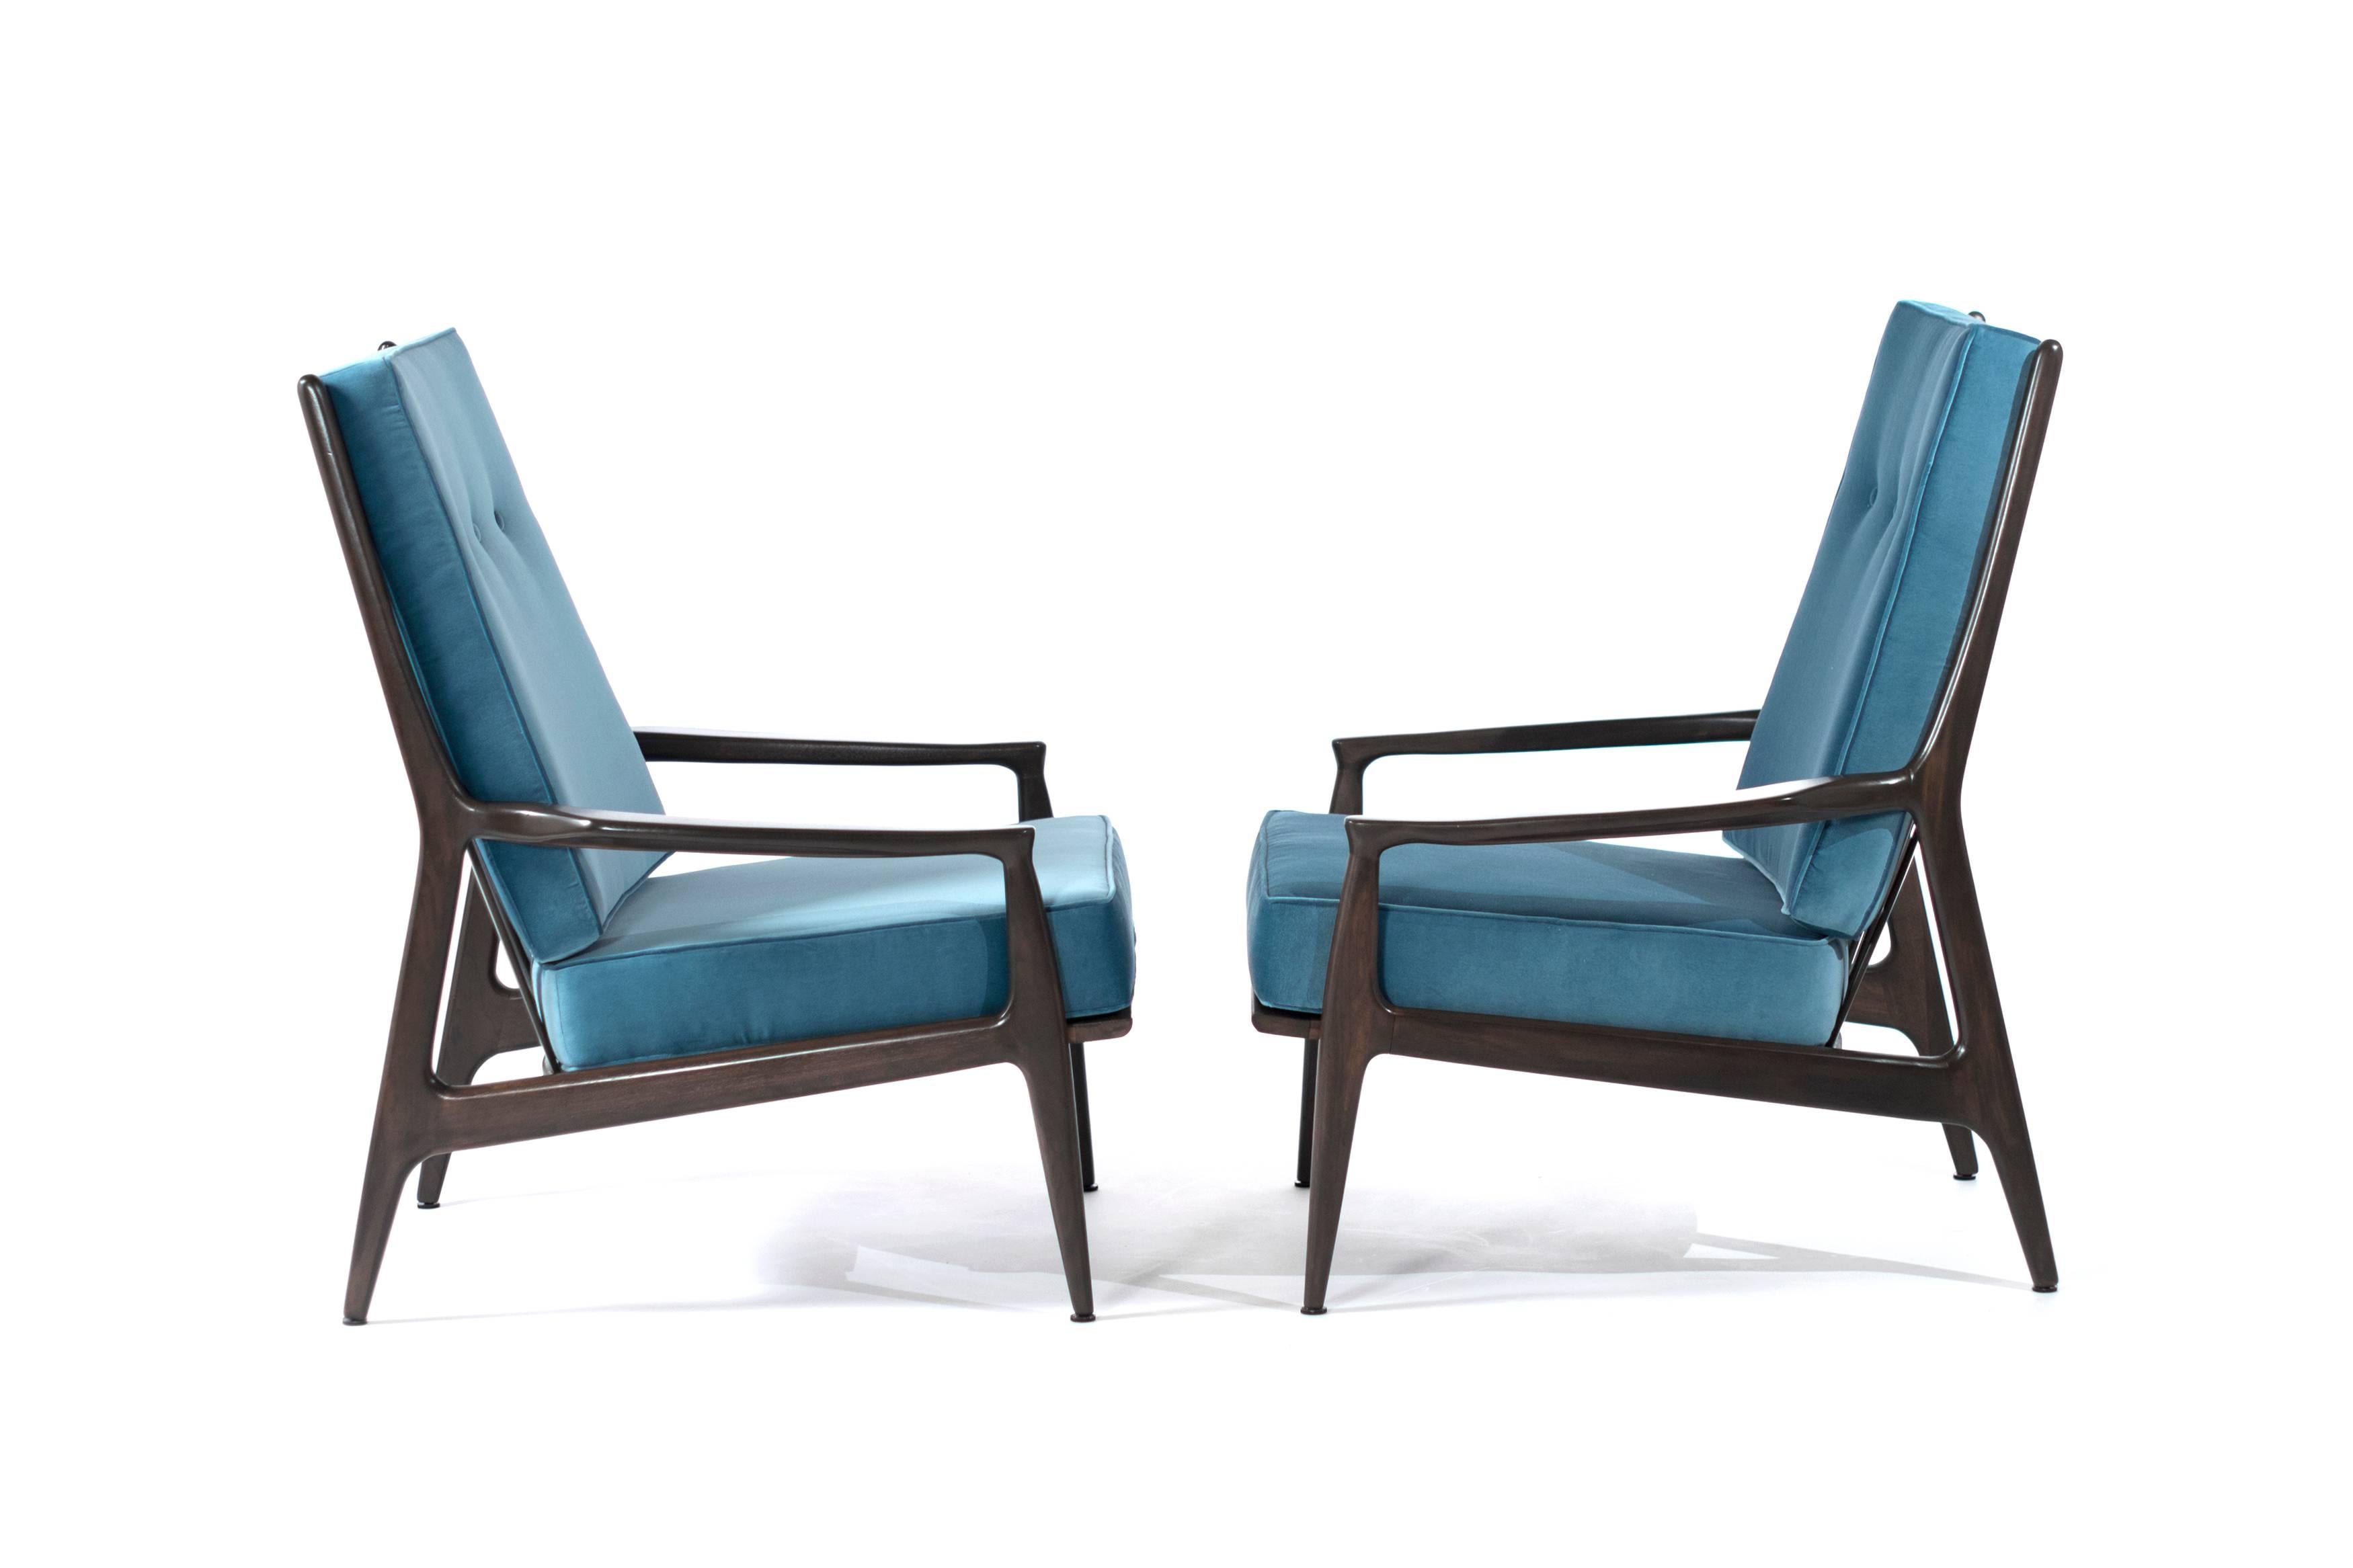 Pair of high back lounge chairs by Milo Baughman for Thayer Coggin. Sculptural walnut frames fully restored, newly upholstered in Robert Allen, blue/turquoise velvet.